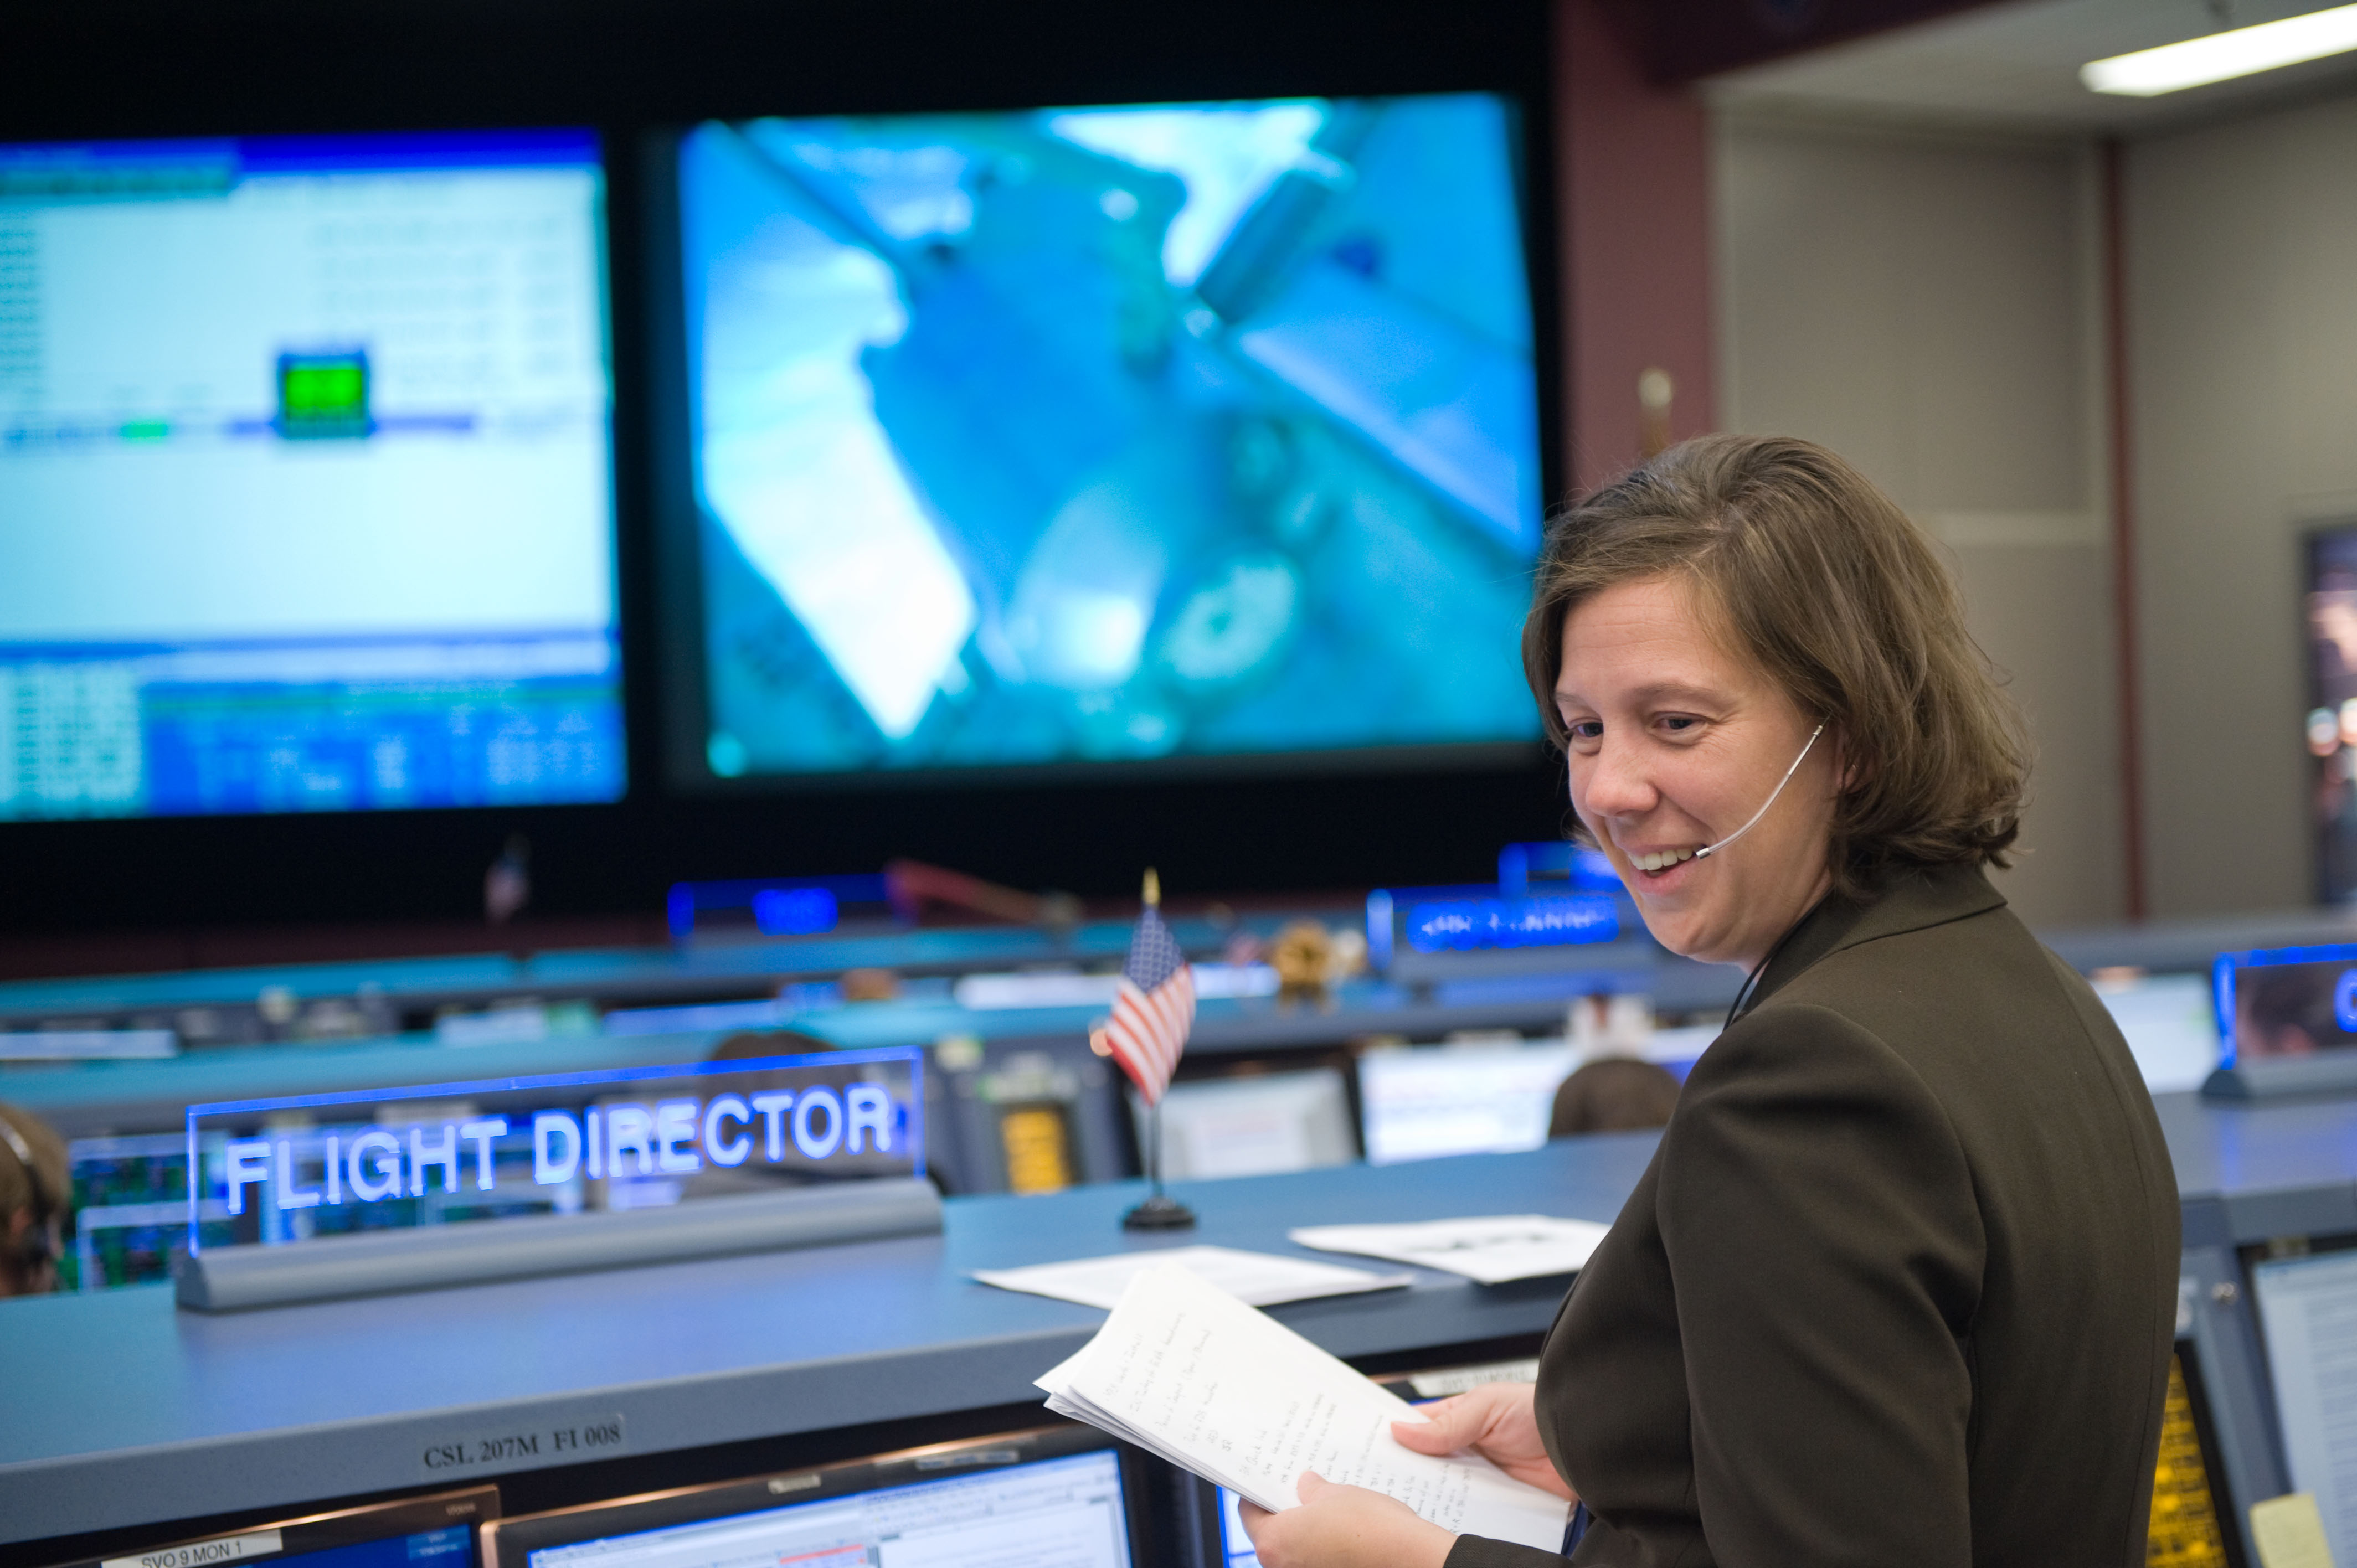 Holly Ridings is at her Flight Director console in the space station flight control room in the Mission Control Center at NASA's Johnson Space Center on Nov. 17, 2008, for day four of the space shuttle Endeavour’s STS-126 mission.<br />Credits: NASA